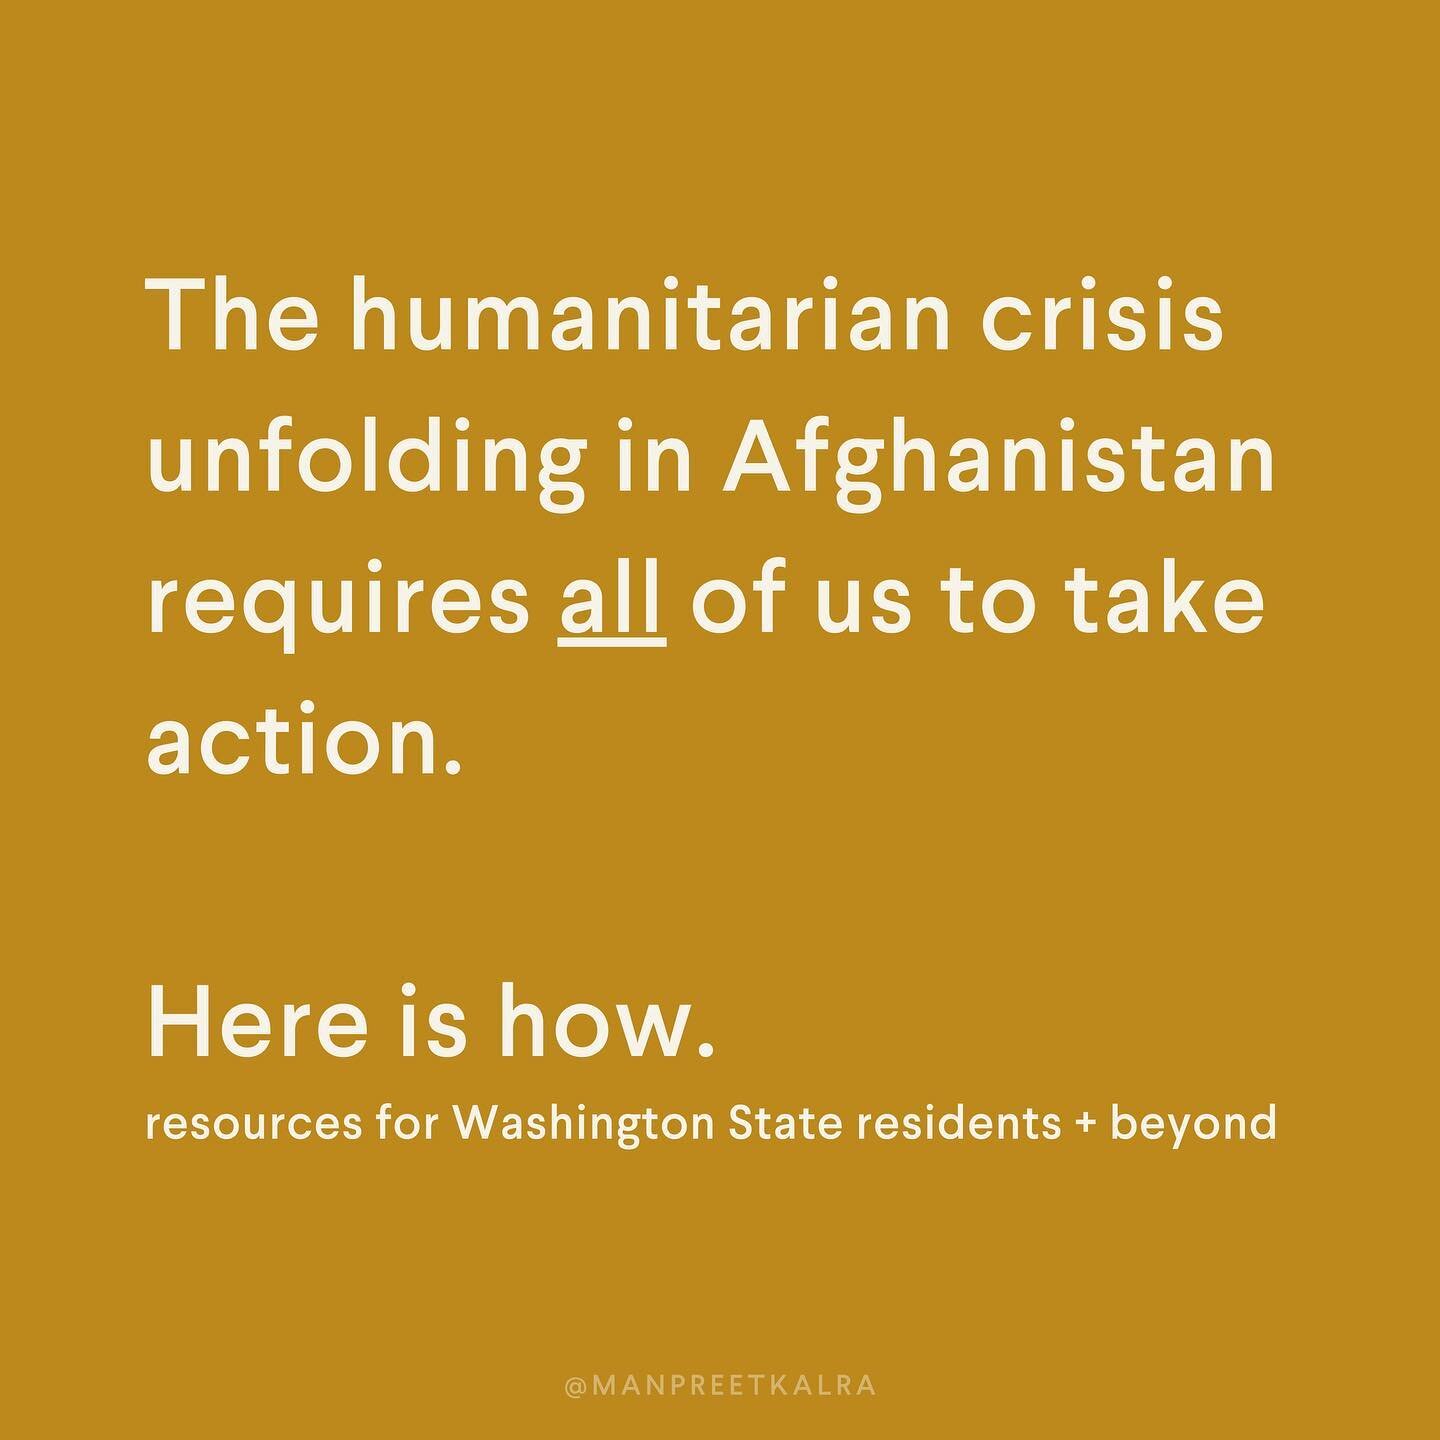 Looking for ways to take action and support the Afghan community? Here are some ideas compiled by local Afghan community members. ⁣
⁣
Tomorrow there will be global protests taking place. Find a protest near you. ✊🏽⁣If you are based in #Seattle, join